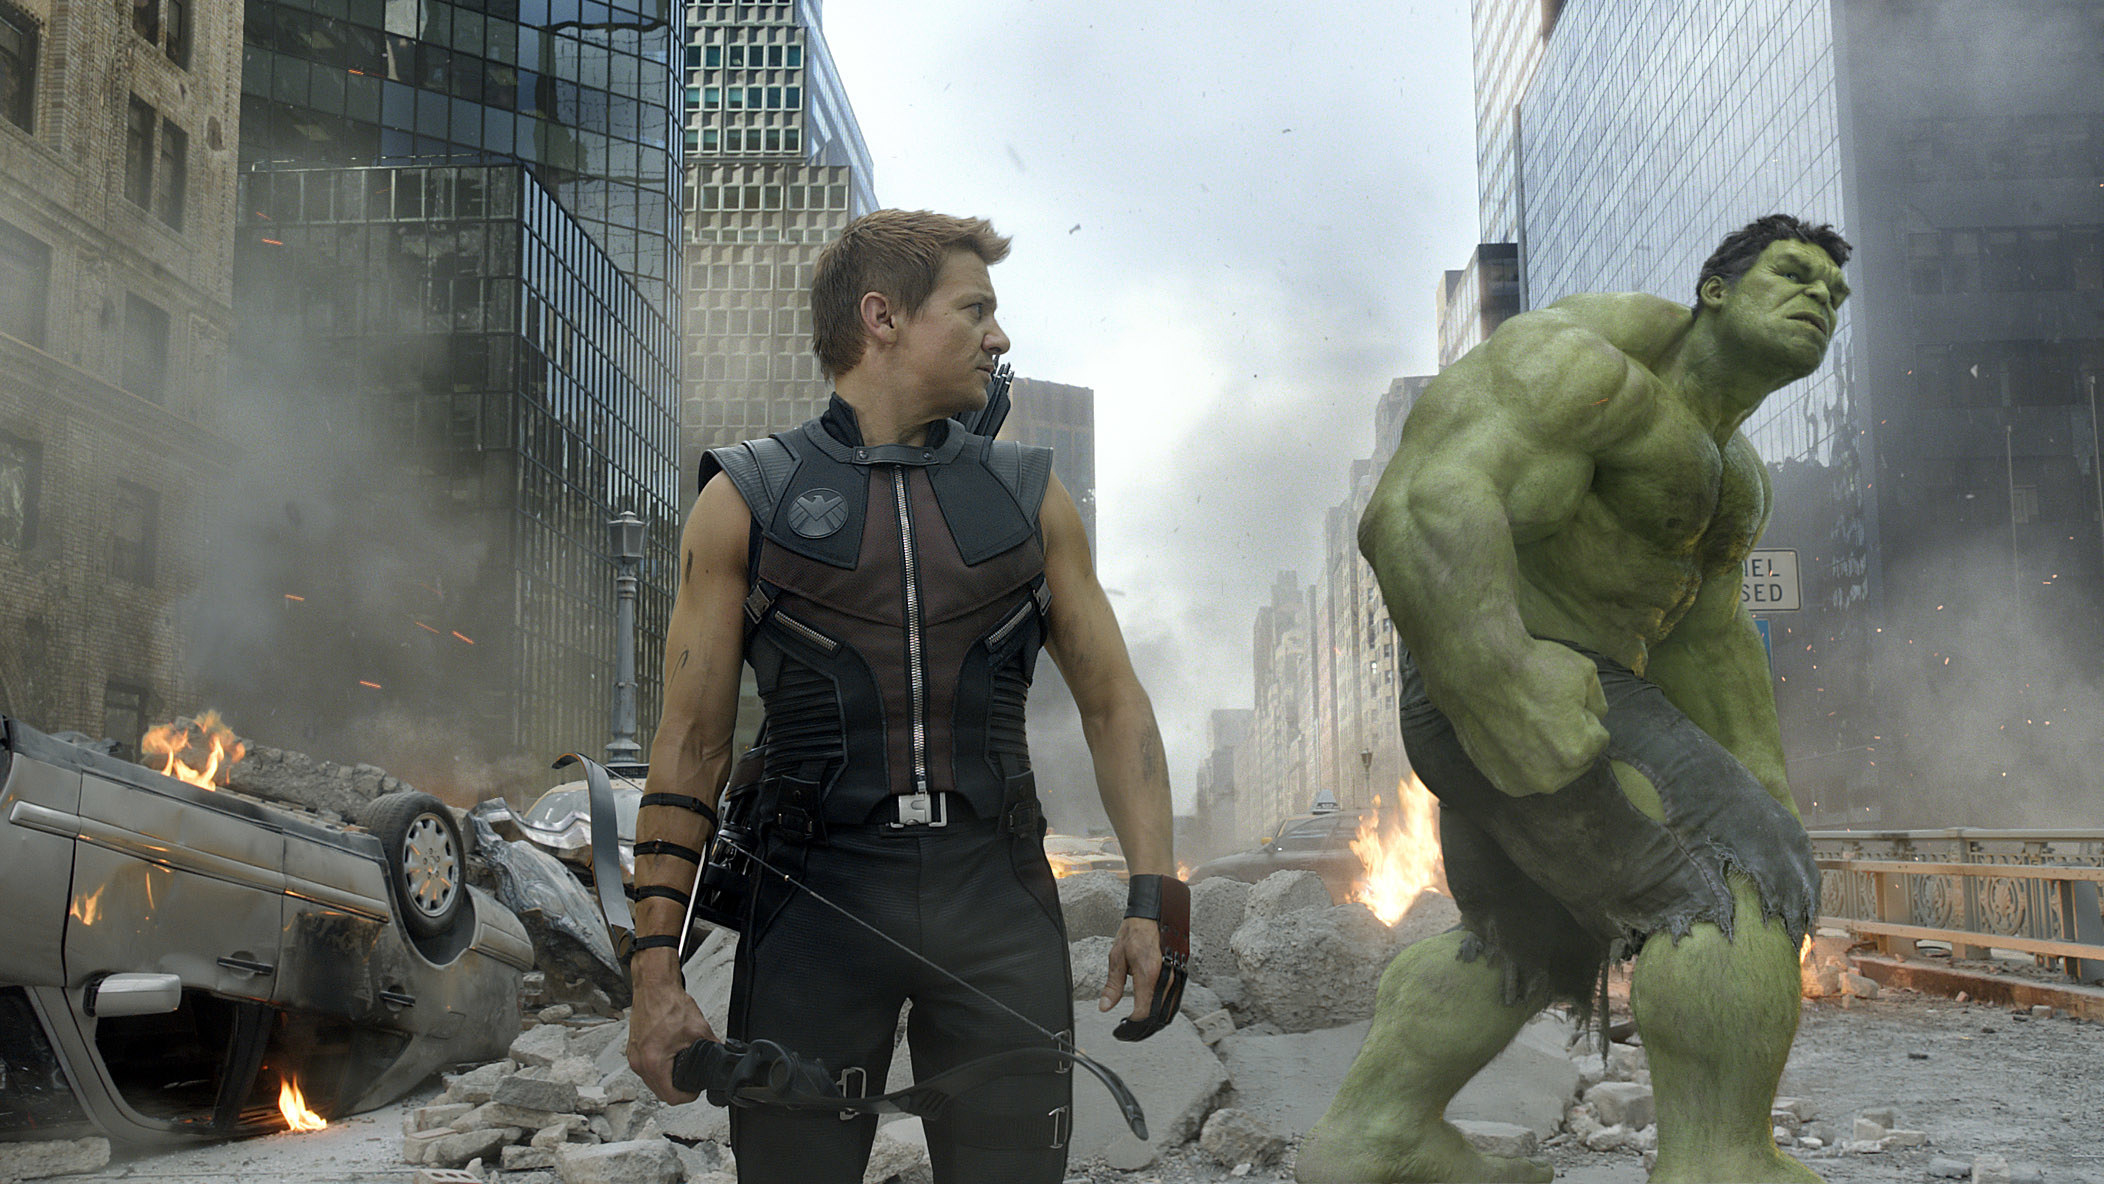 Jeremy Renner and Mark Ruffalo as Hawkeye and the Hulk in &quot;The Avengers.&quot;